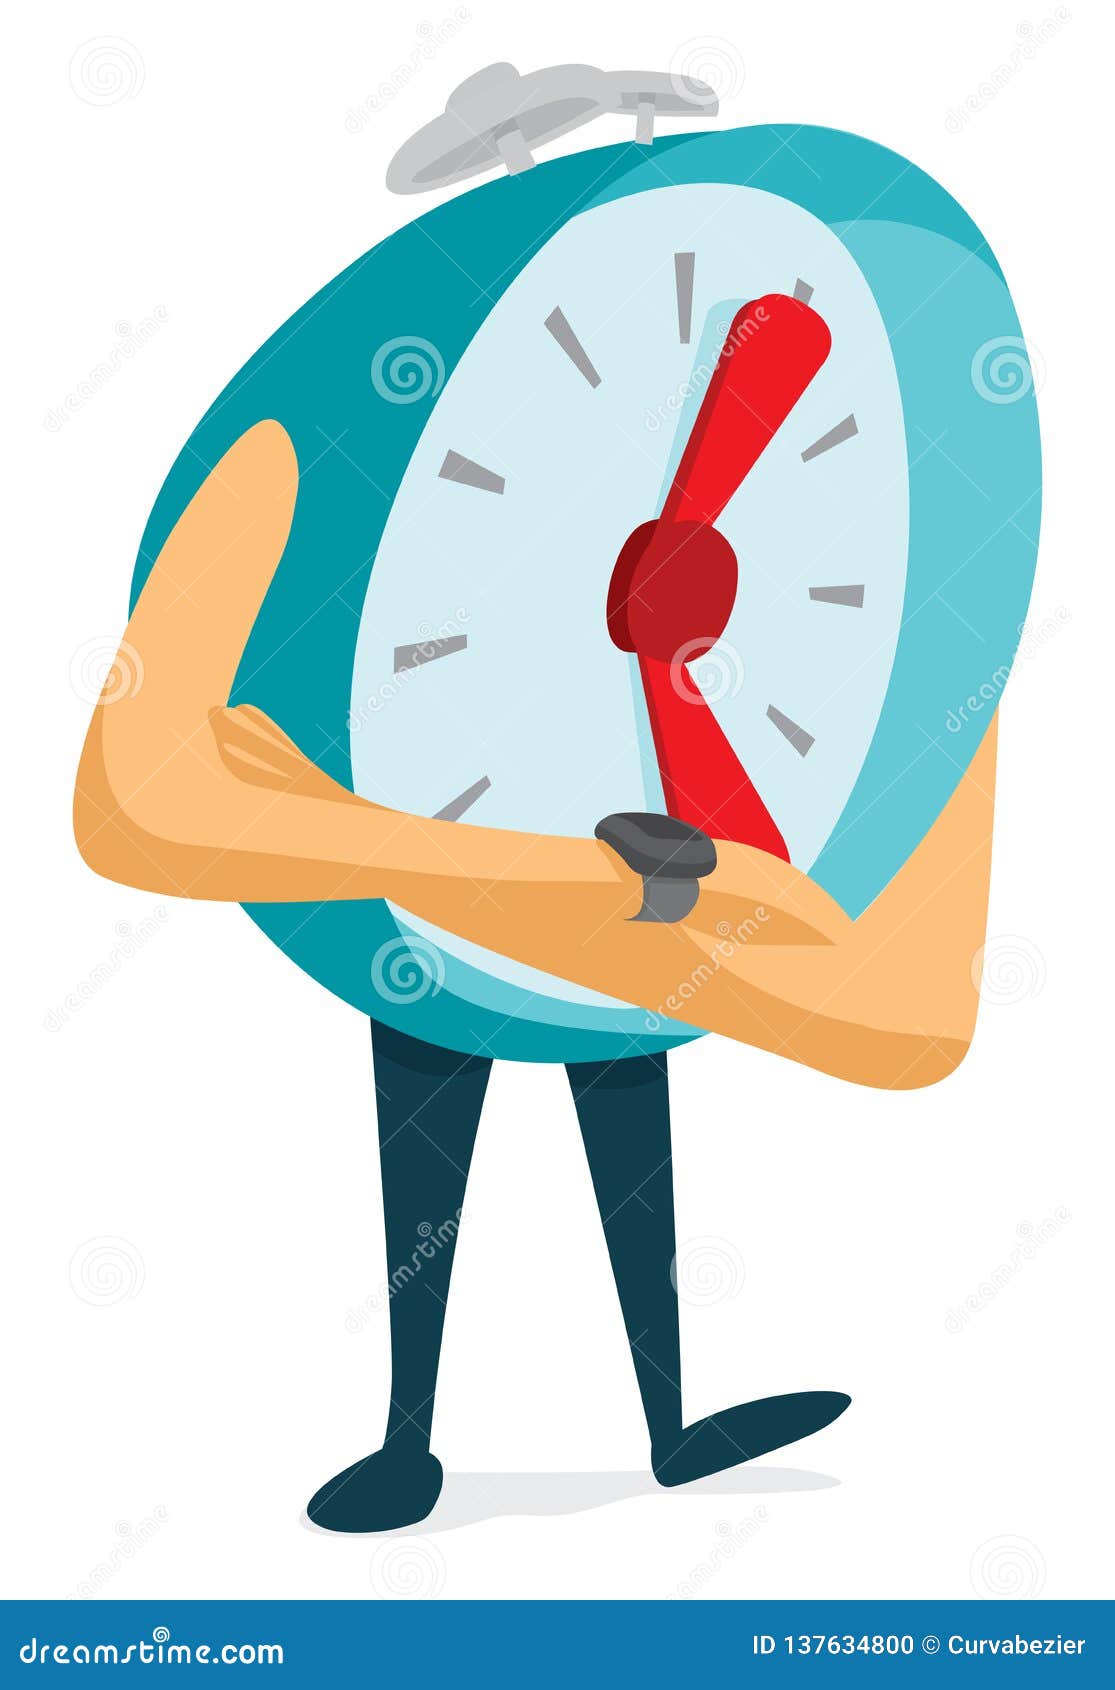 Impatient Alarm Clock Waiting or Checking Time Stock Vector - Illustration  of offended, clock: 137634800